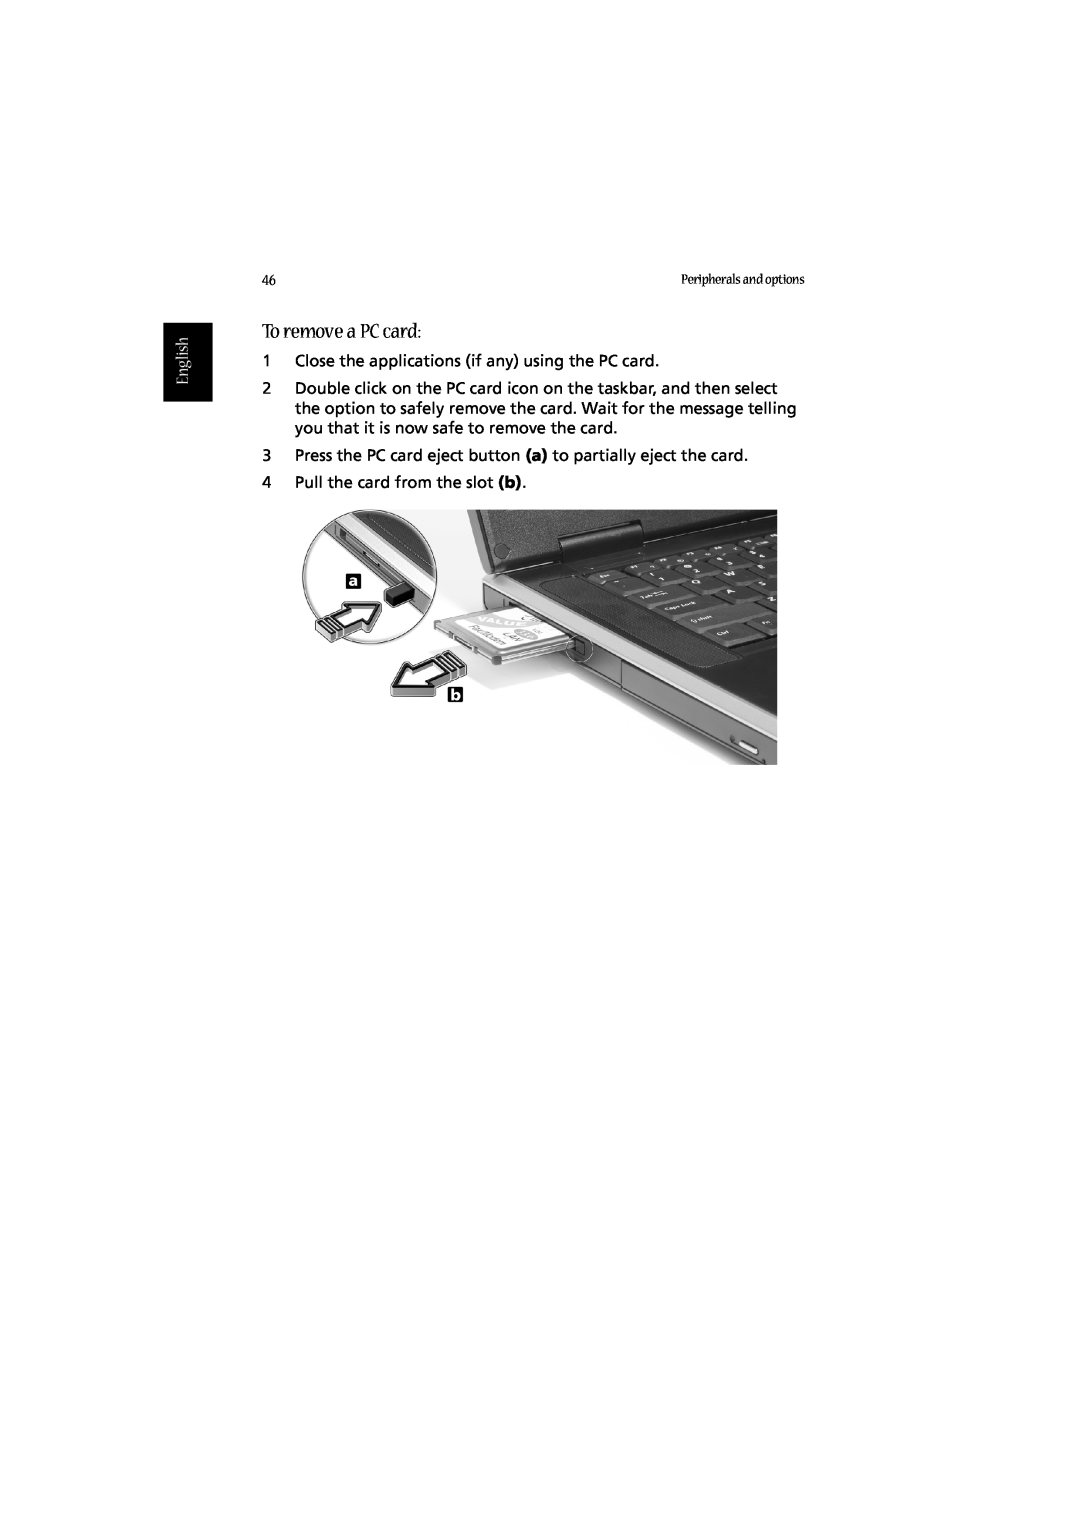 Acer 2010 To remove a PC card, English, Close the applications if any using the PC card, Pull the card from the slot b 